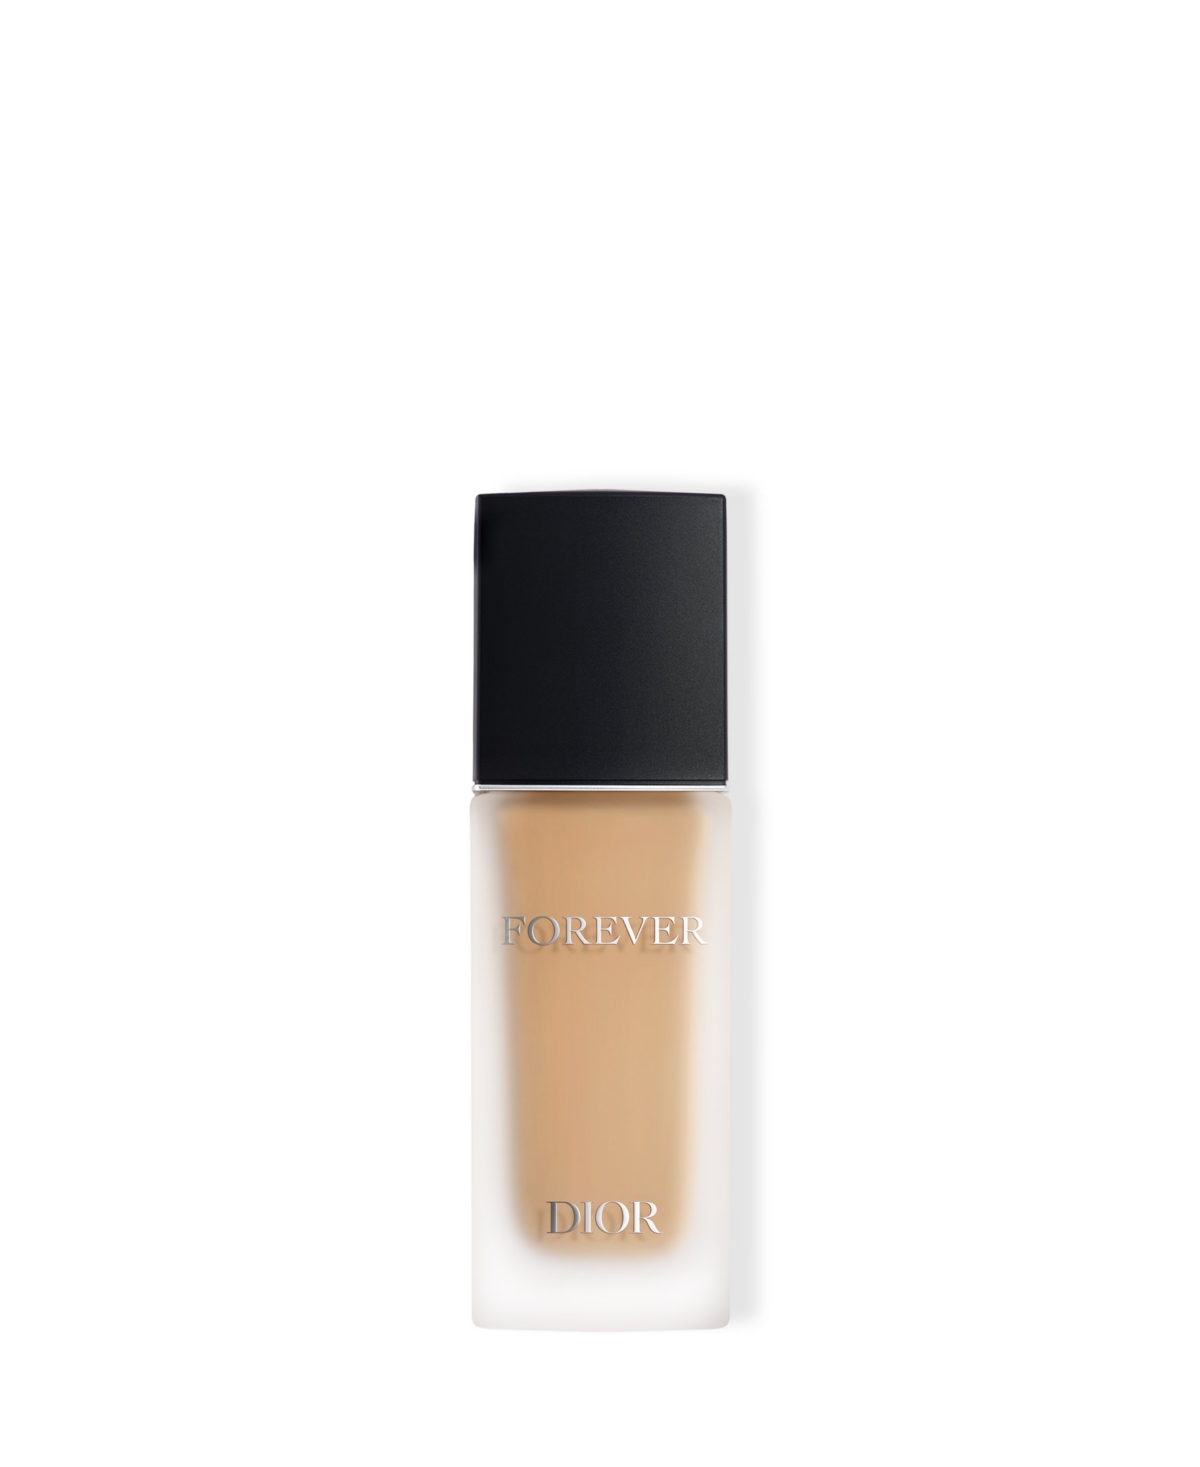 Dior Forever Matte Skincare Foundation Spf 15 In Warm (light Skin With Warm Tones)